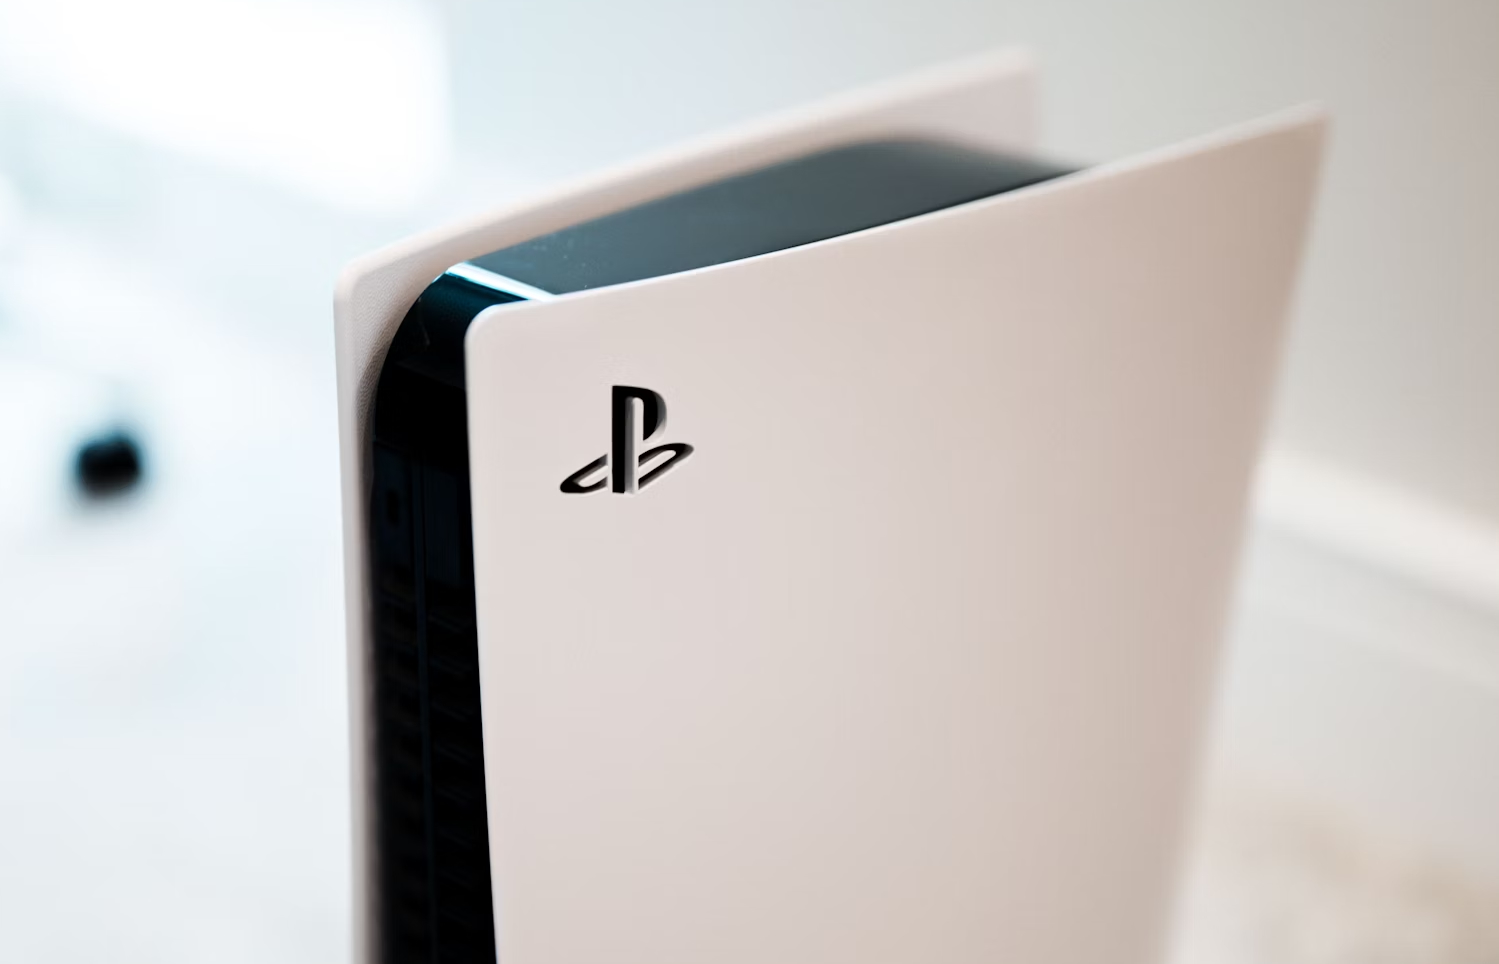 PlayStation 5 Skilled: Sony to deploy PlayStation Spectral Large Decision upscaling technological innovation to realize 4K and 60 FPS or 8K and 30 FPS effectiveness targets on PS5 Skilled console